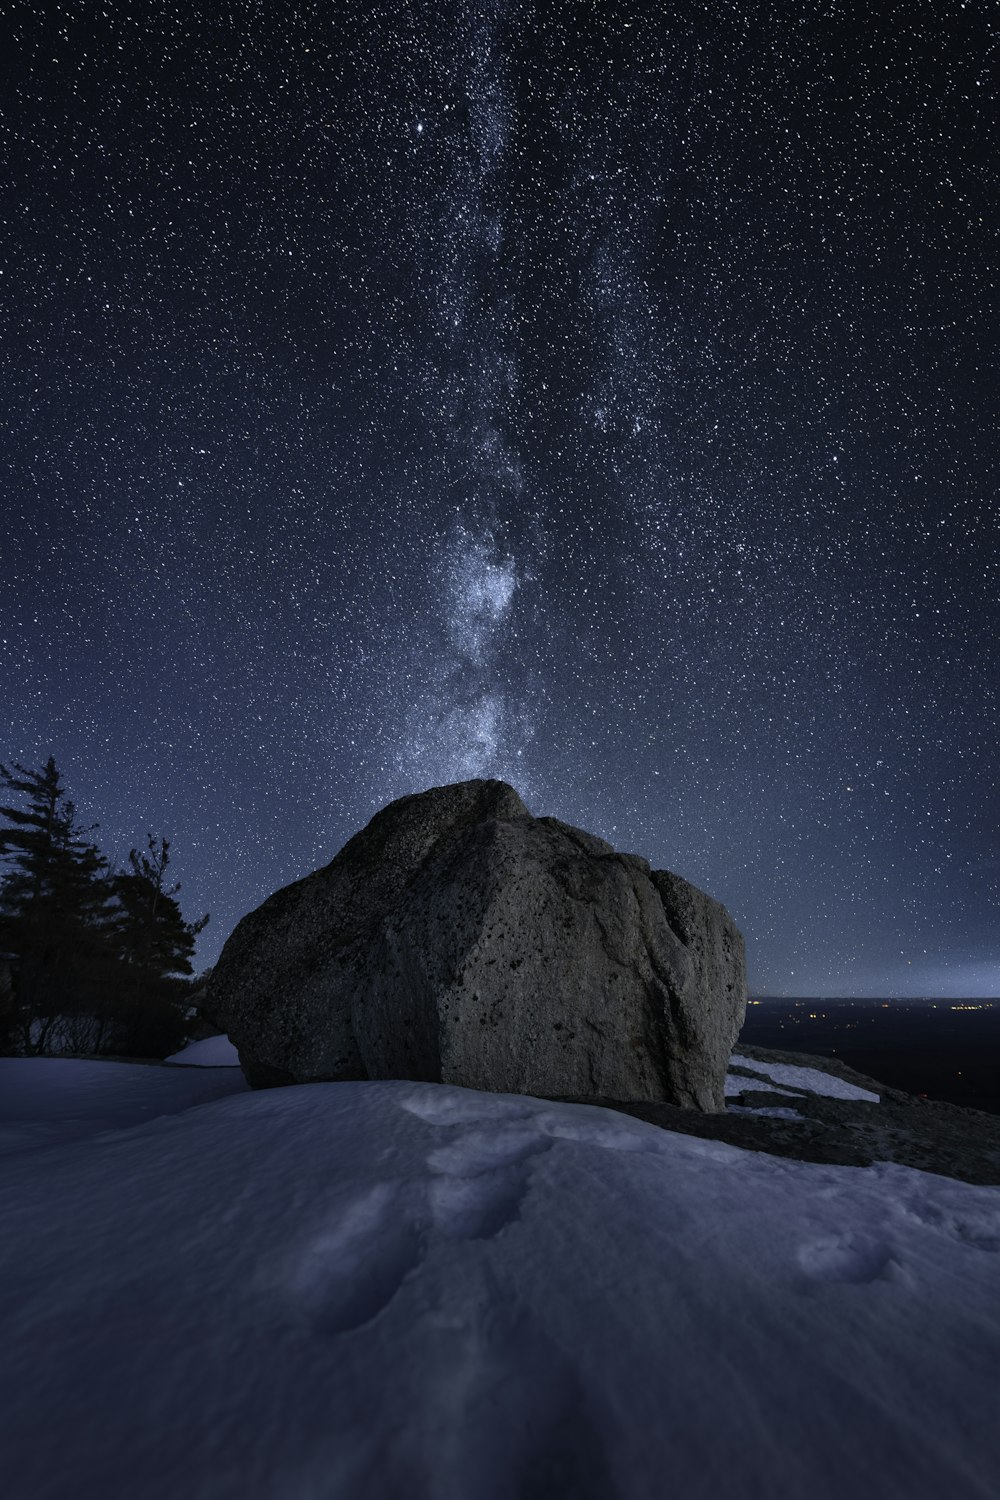 a rock in the snow under a night sky filled with stars